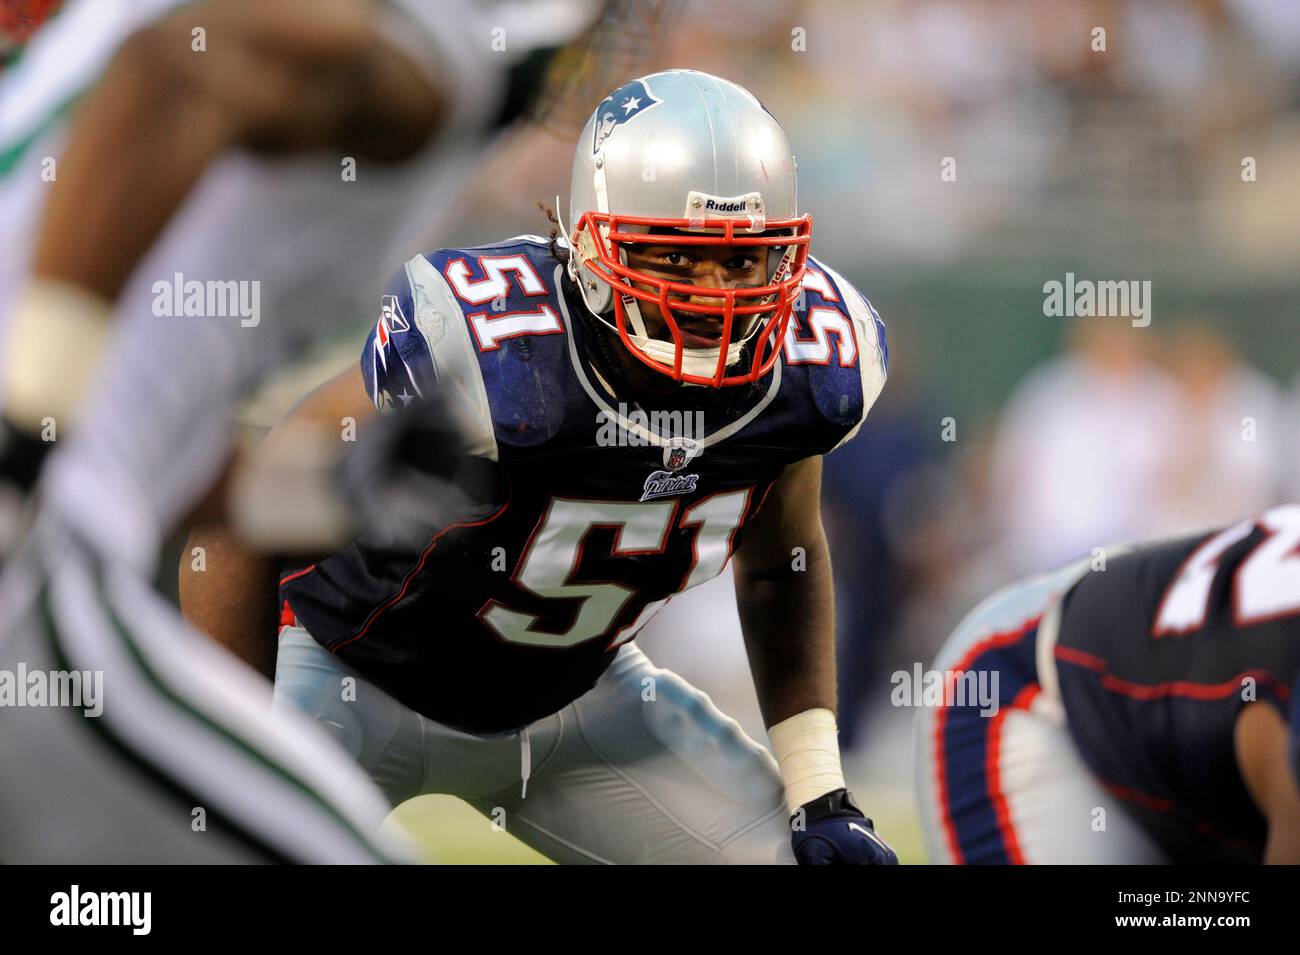 19 September 2010: New England Patriots linebacker Jerod Mayo (51) during  the Jets 28-14 win over the Patriots at the New Meadowlands Stadium in East  Rutherford, New Jersey The Jets defeated the